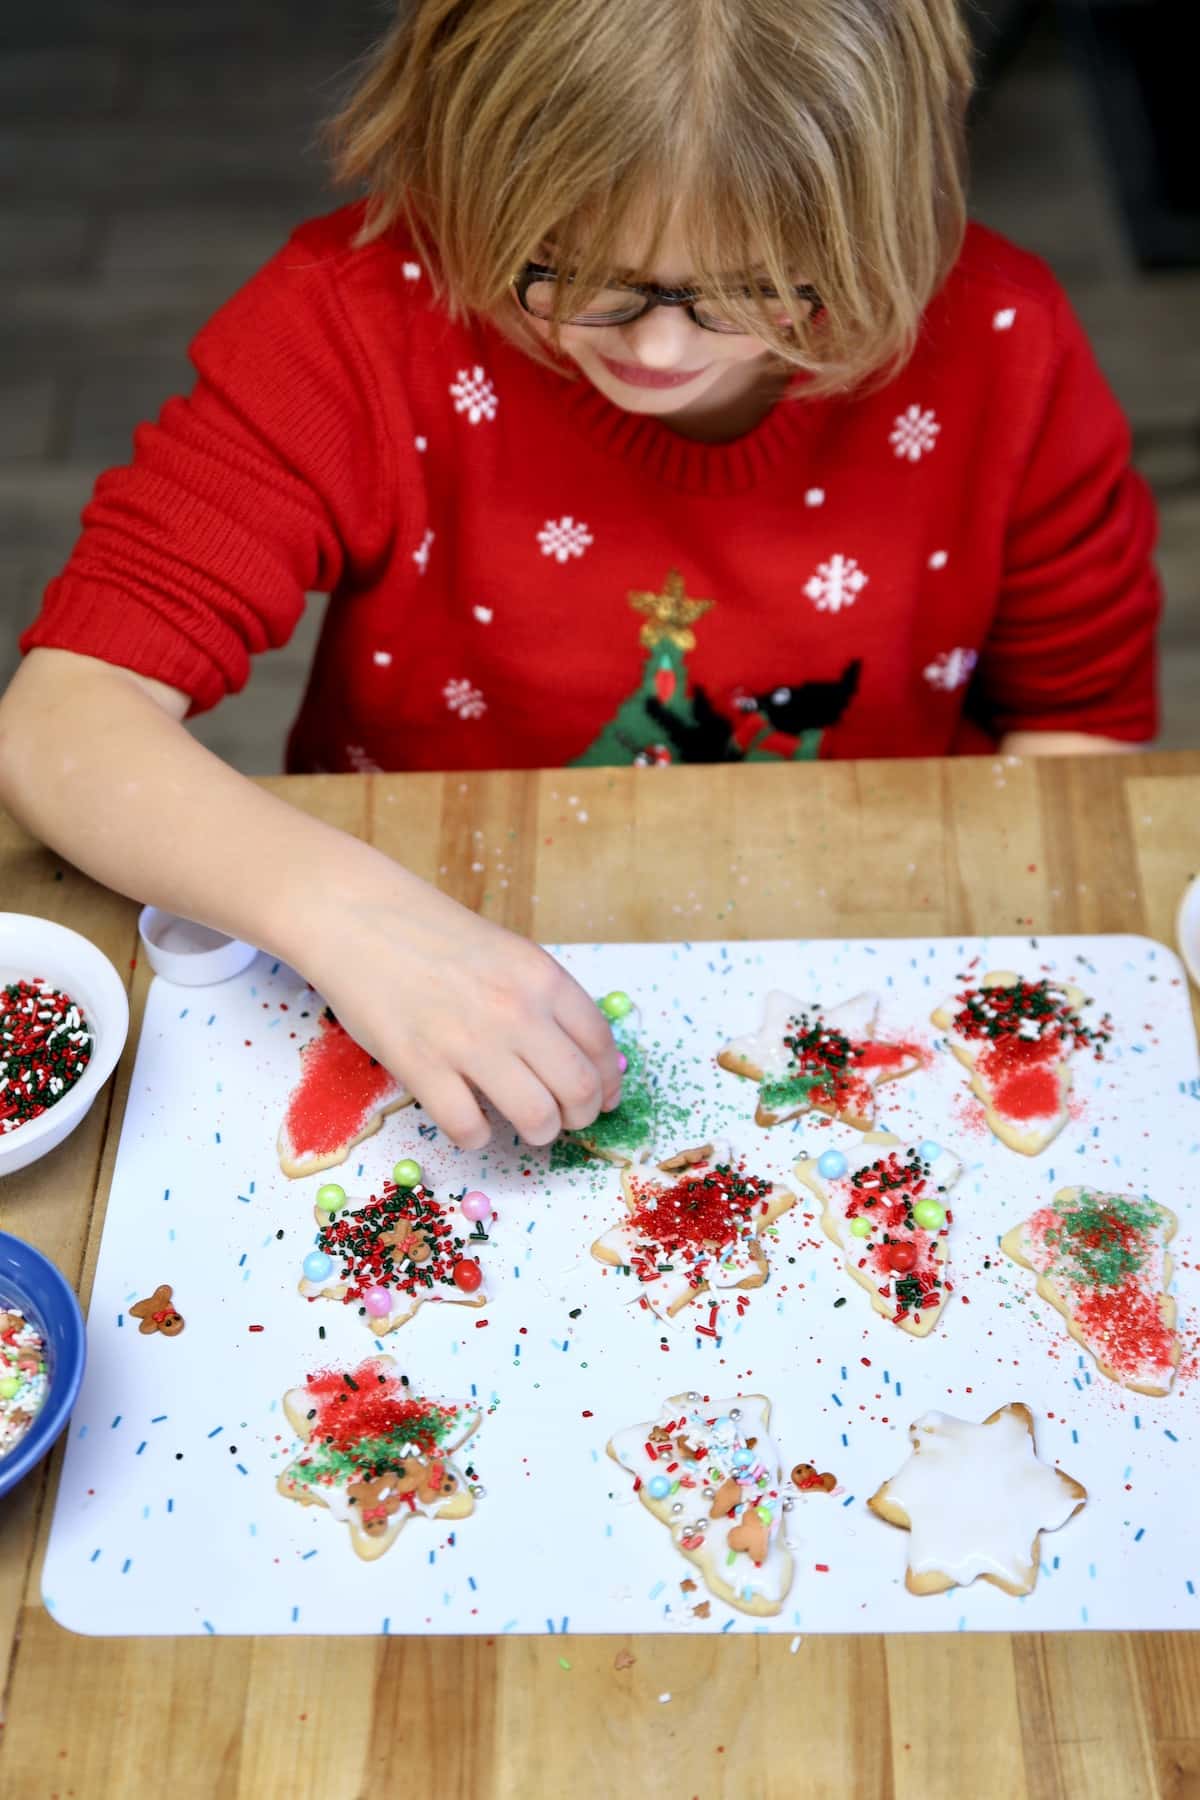 Girl decorating sugar cookies with icing and sprinkles.